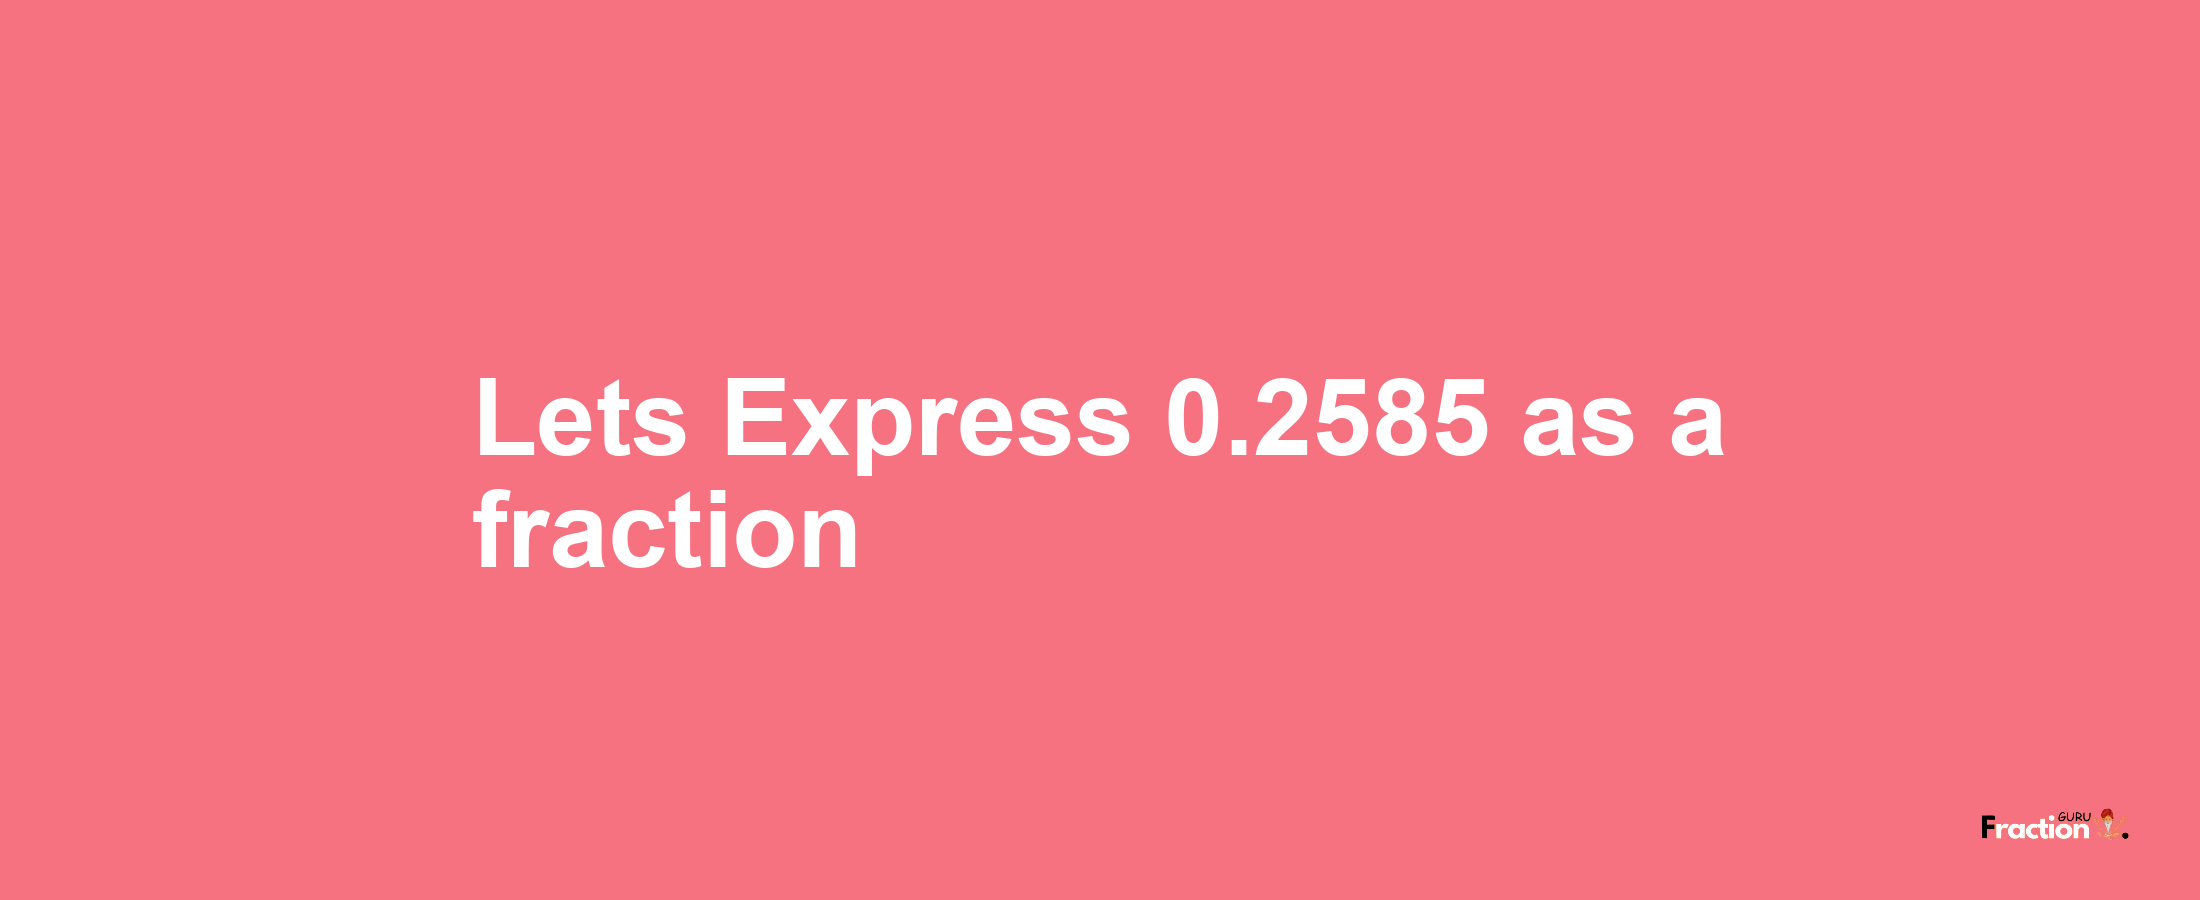 Lets Express 0.2585 as afraction